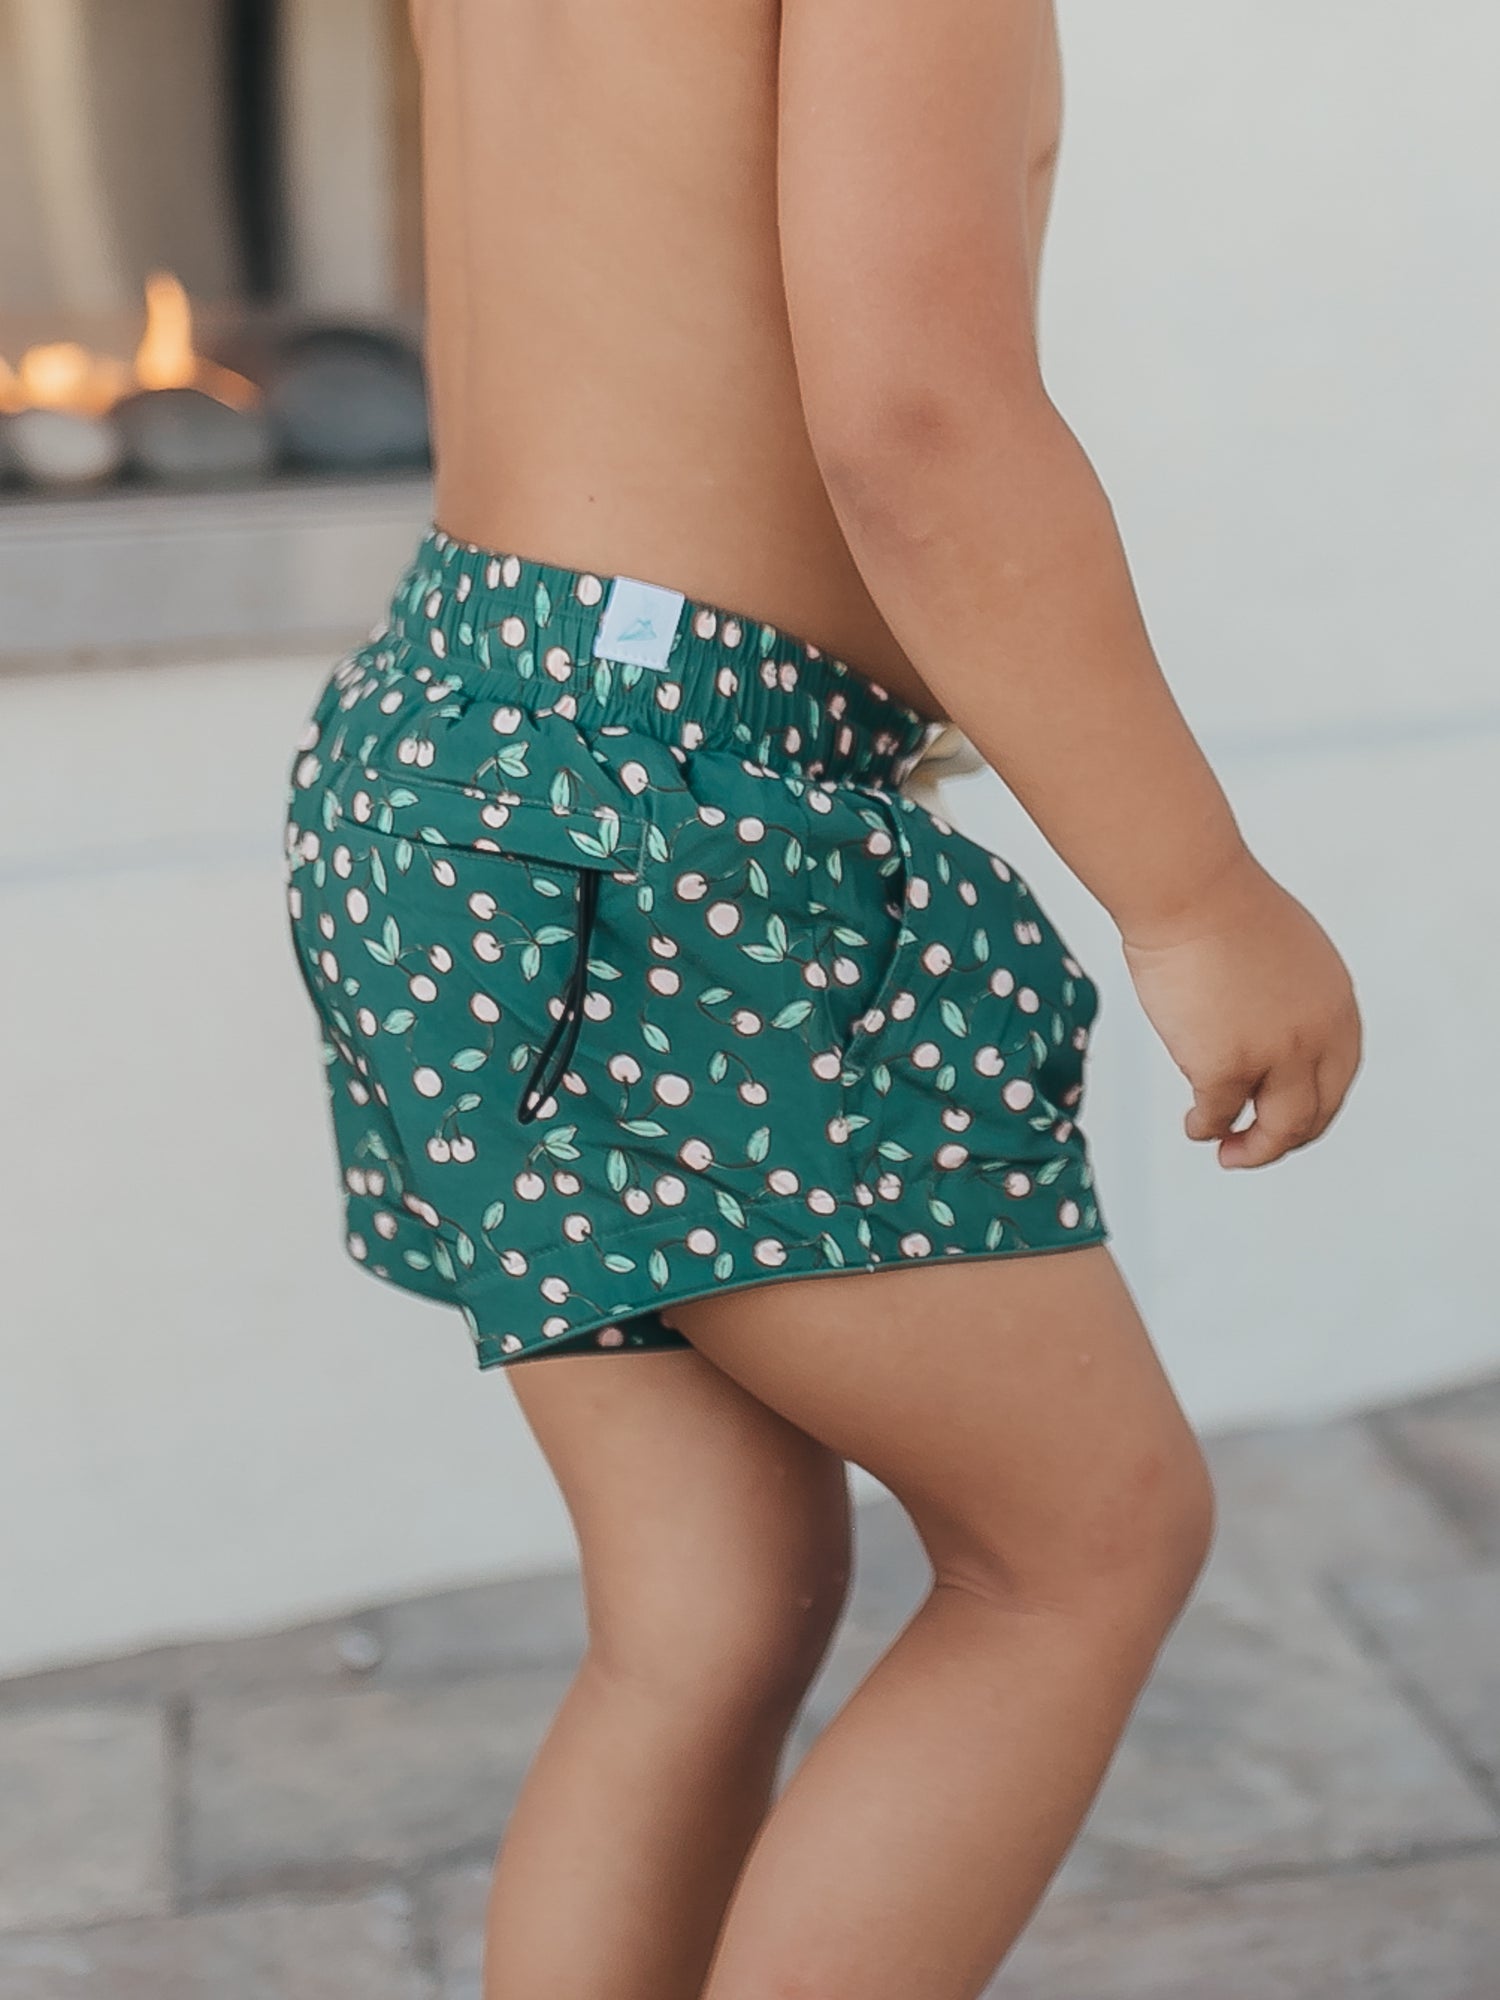 This image of a boy features the European cut style of our Boy's Everyday Lined Trunks – Cherry on Top. This pair of trunks is a pattern of light pink cherries on a dark green background.